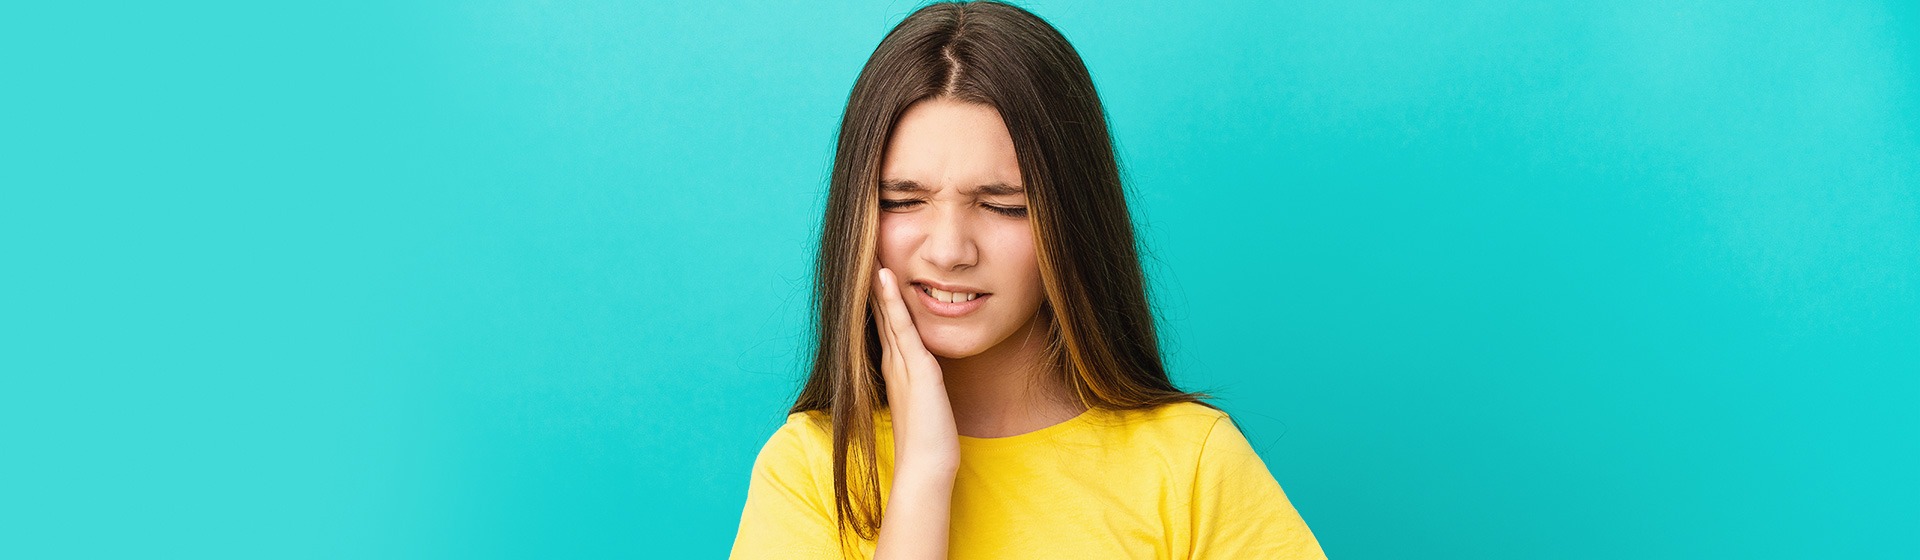 How to Pull a Loose Tooth Without Pain?